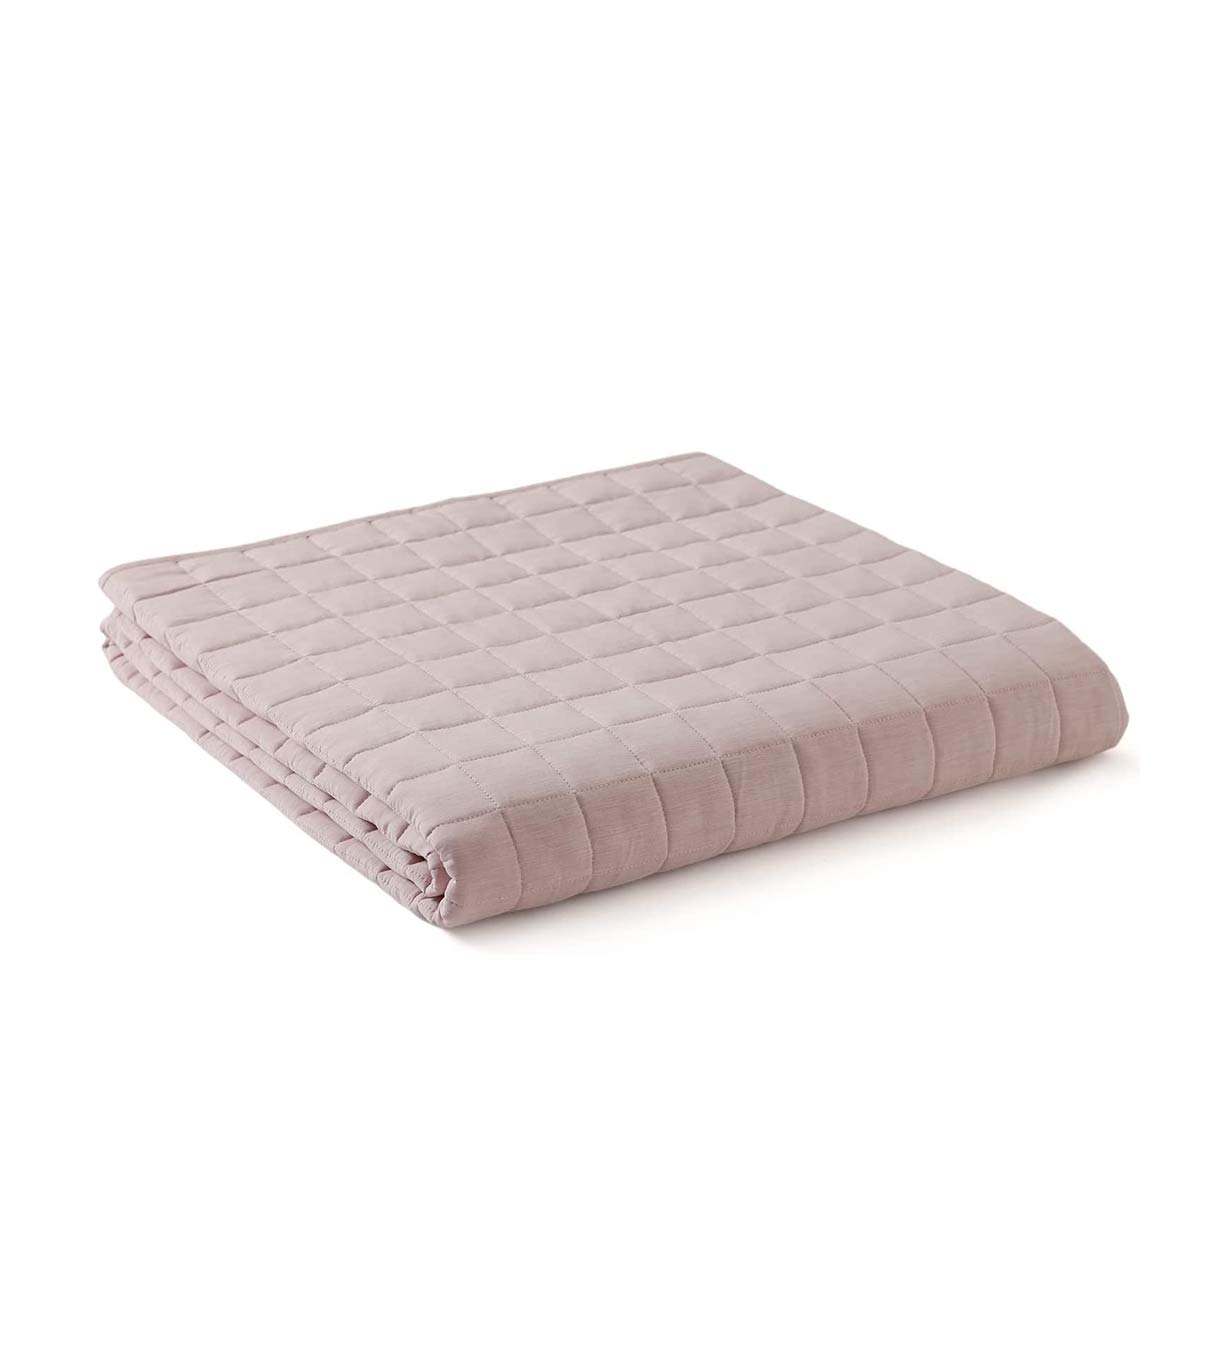 Product: Exclusive Polyester Weighted Blanket | Color: Cooling Nylon/PE Pale Pink